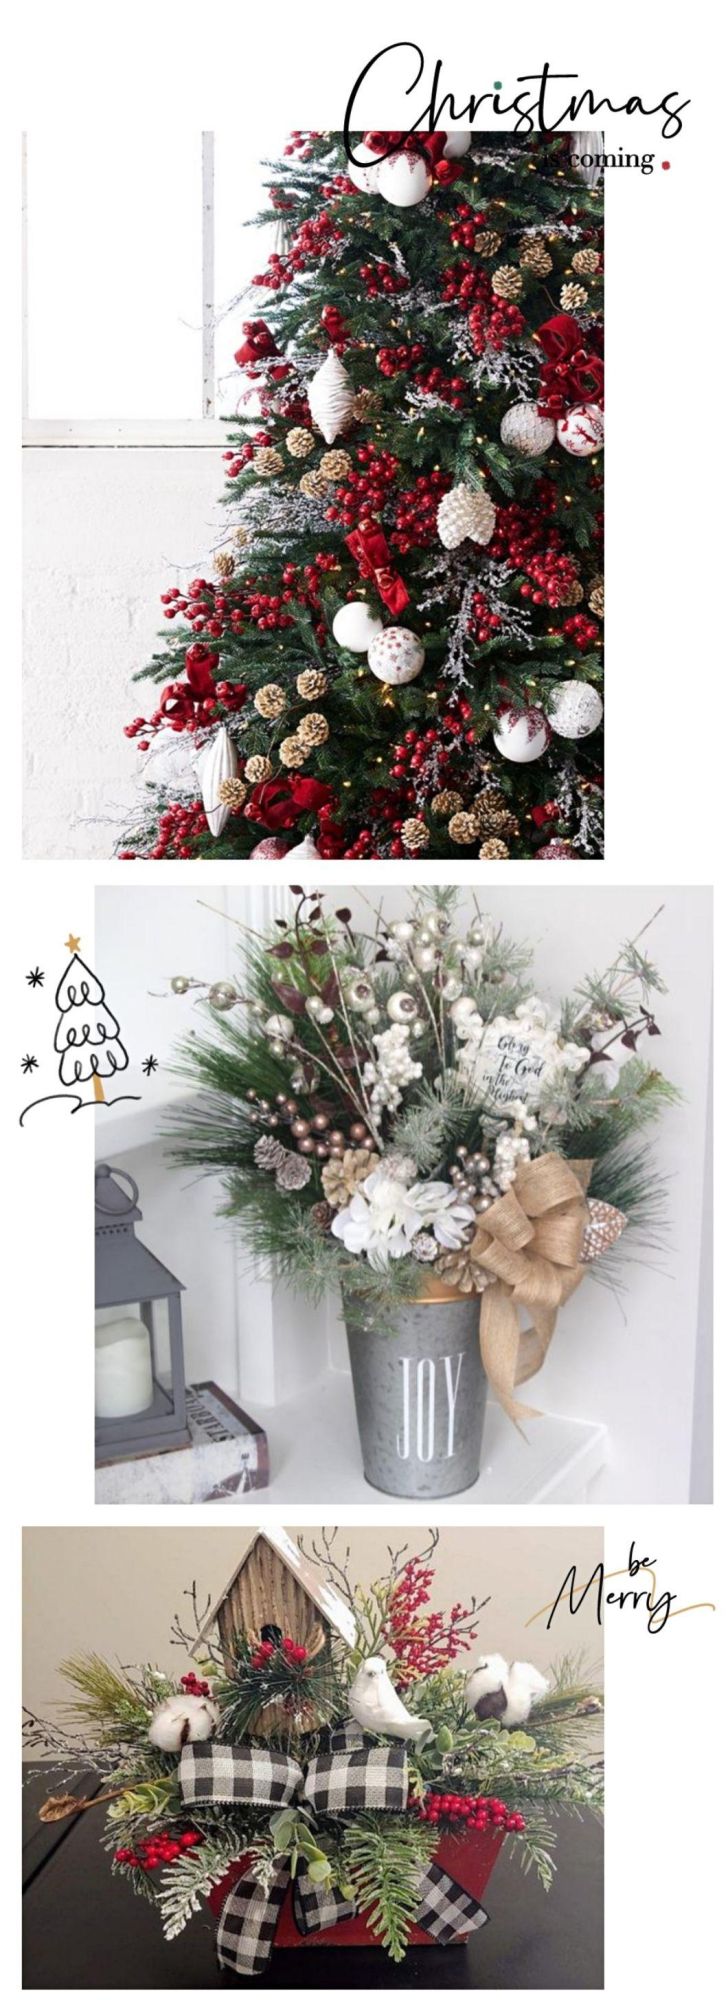 20cm Christmas Pick with Pine Cone and White Berries